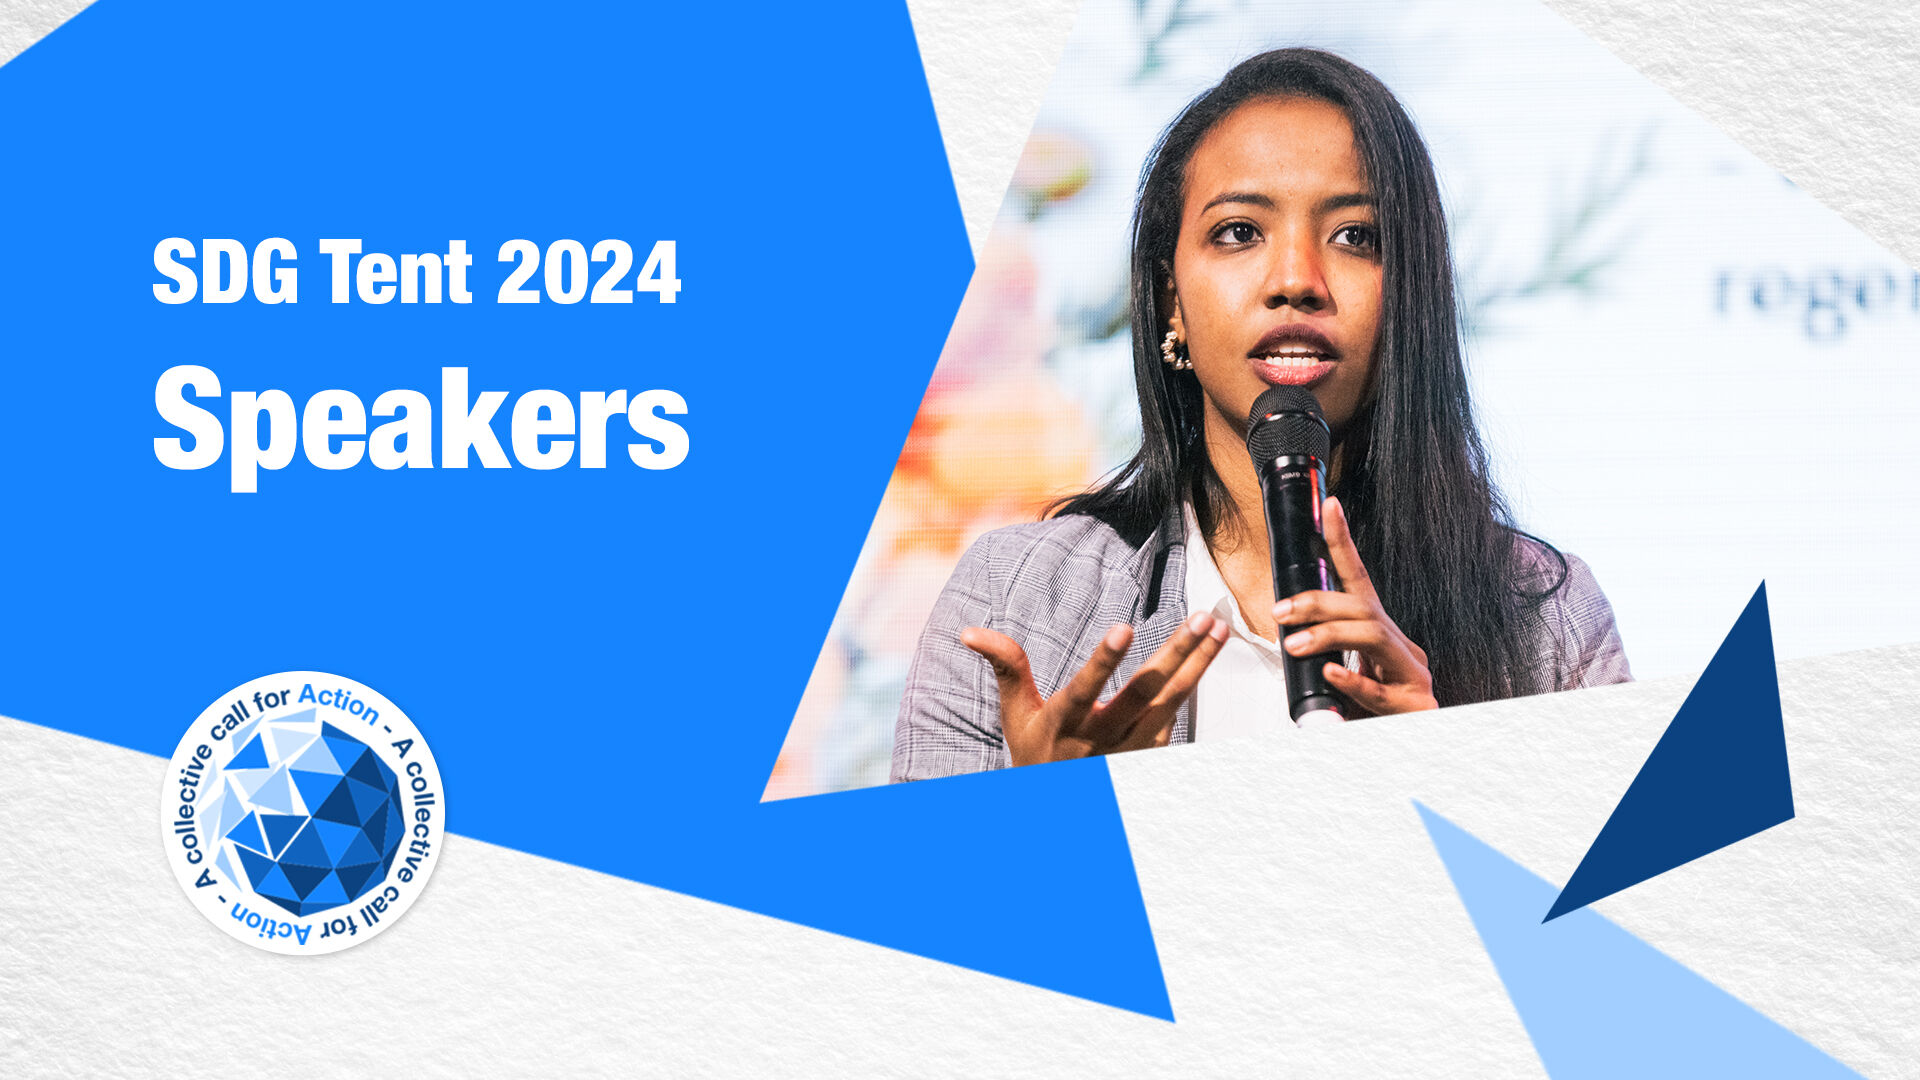 Discover the speakers of the SDG Tent 2024